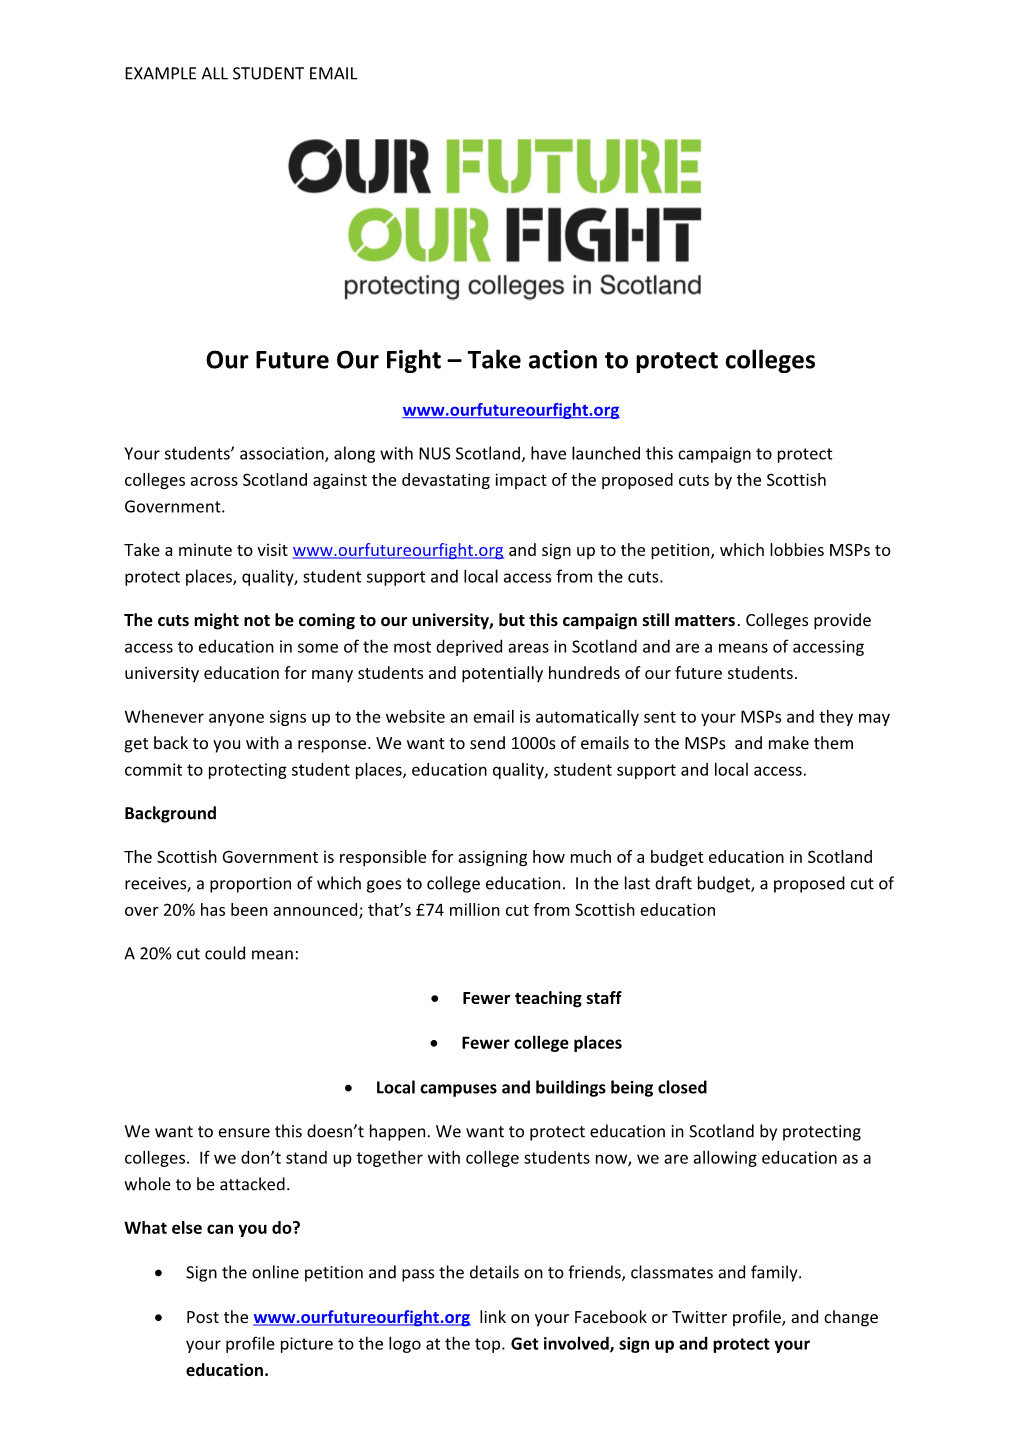 Our Future Our Fight Take Action to Protect Colleges